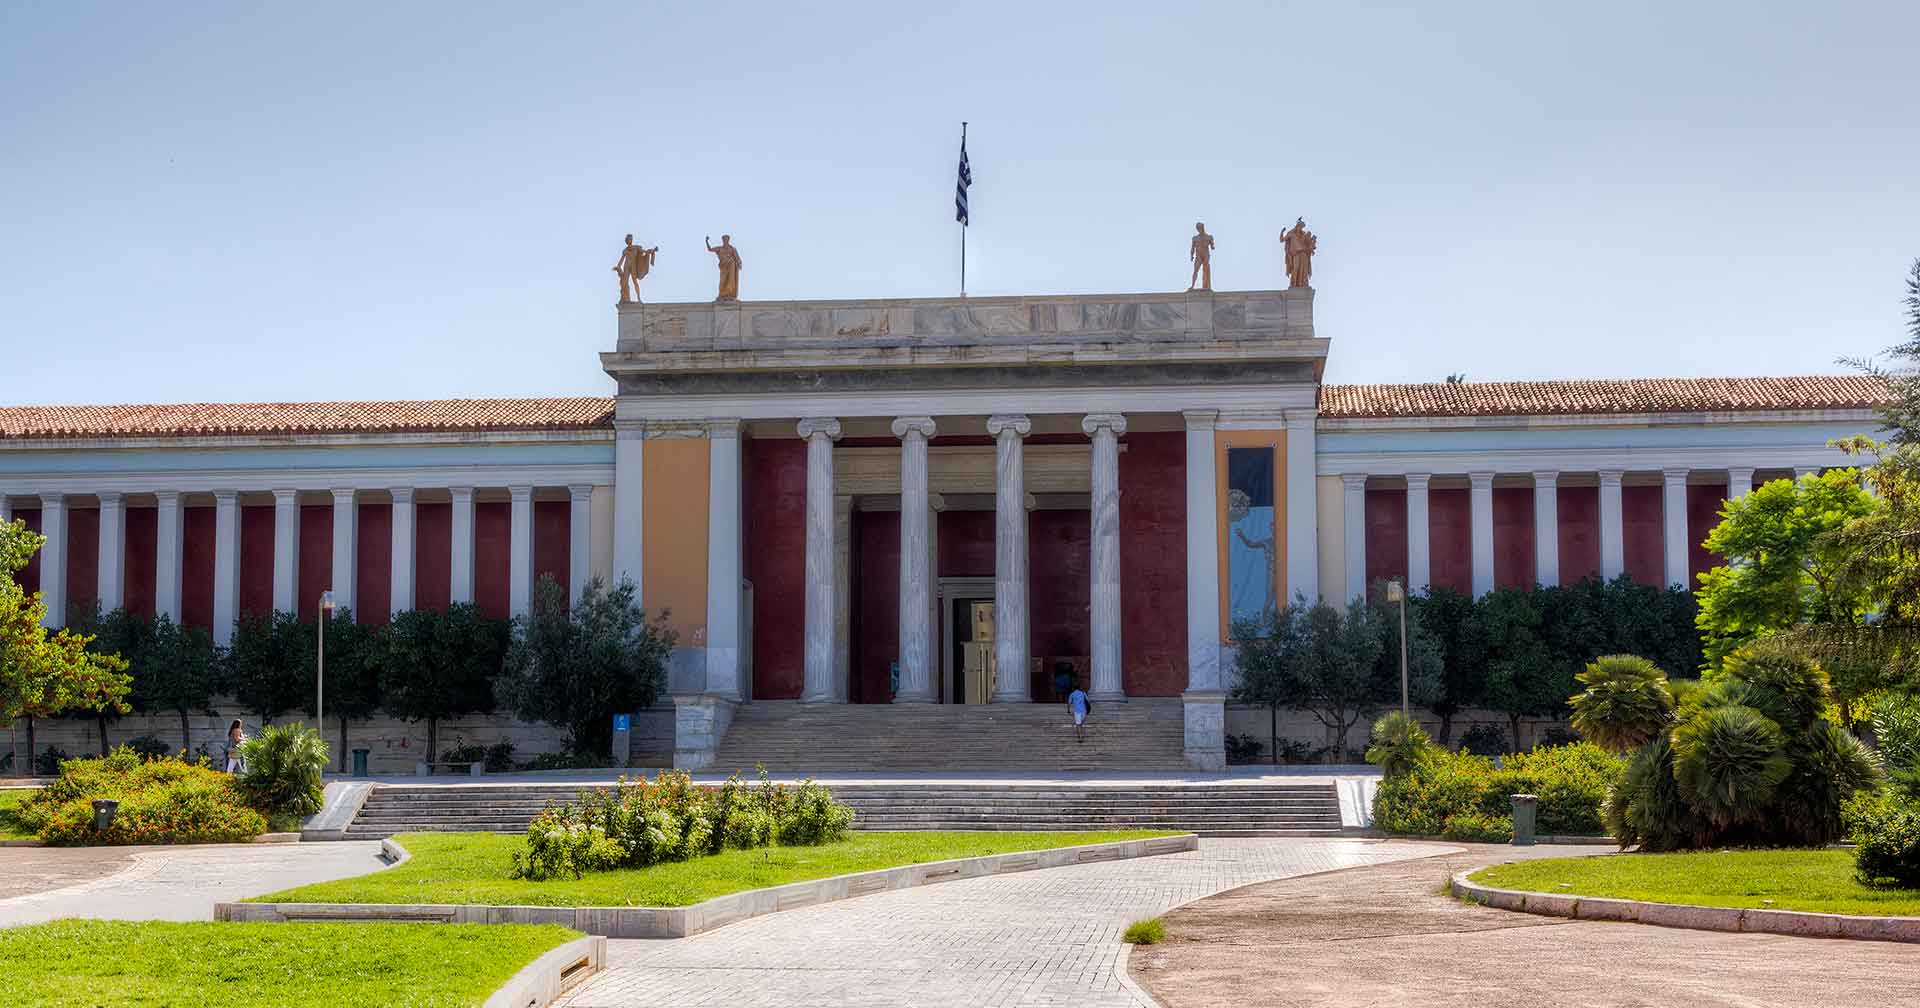 The Acropolis & Archaeological Museum